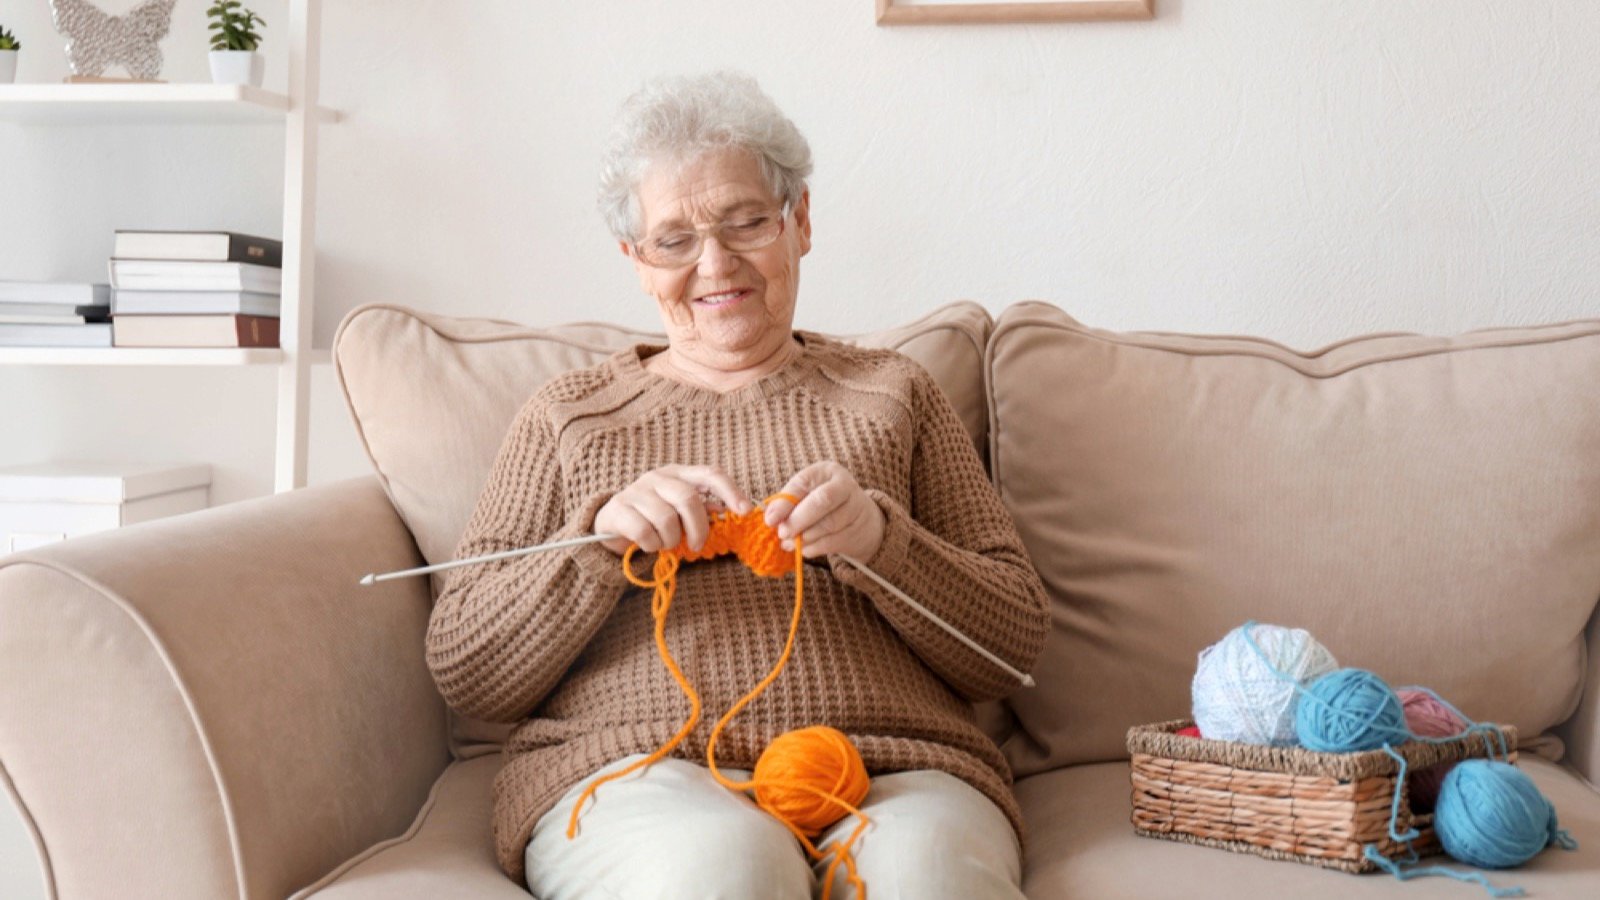 <p>A hobby many pick up during retirement, knitting can be really helpful for aging adults. Knitting has been shown to help brain activity, which is crucial at this age, along with making friends within this hobby. Knitting can also help you create your own articles of clothing, and you can maybe start a business from it.</p>